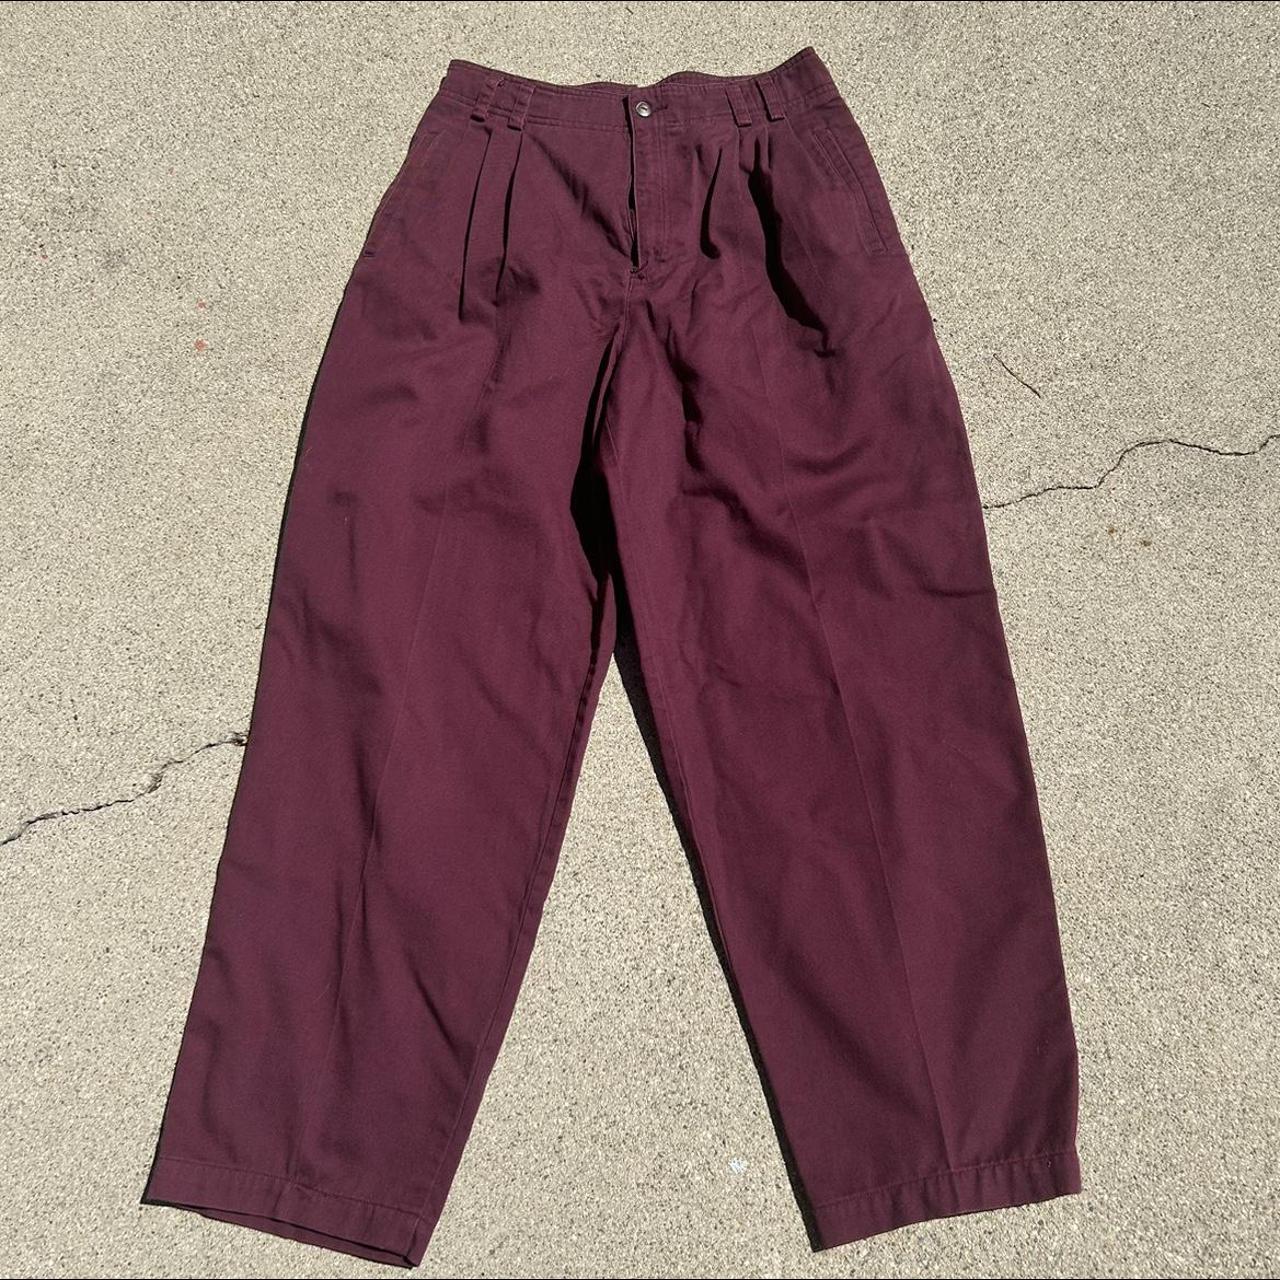 Lizsport preppy plum pants 💜 These are the most... - Depop